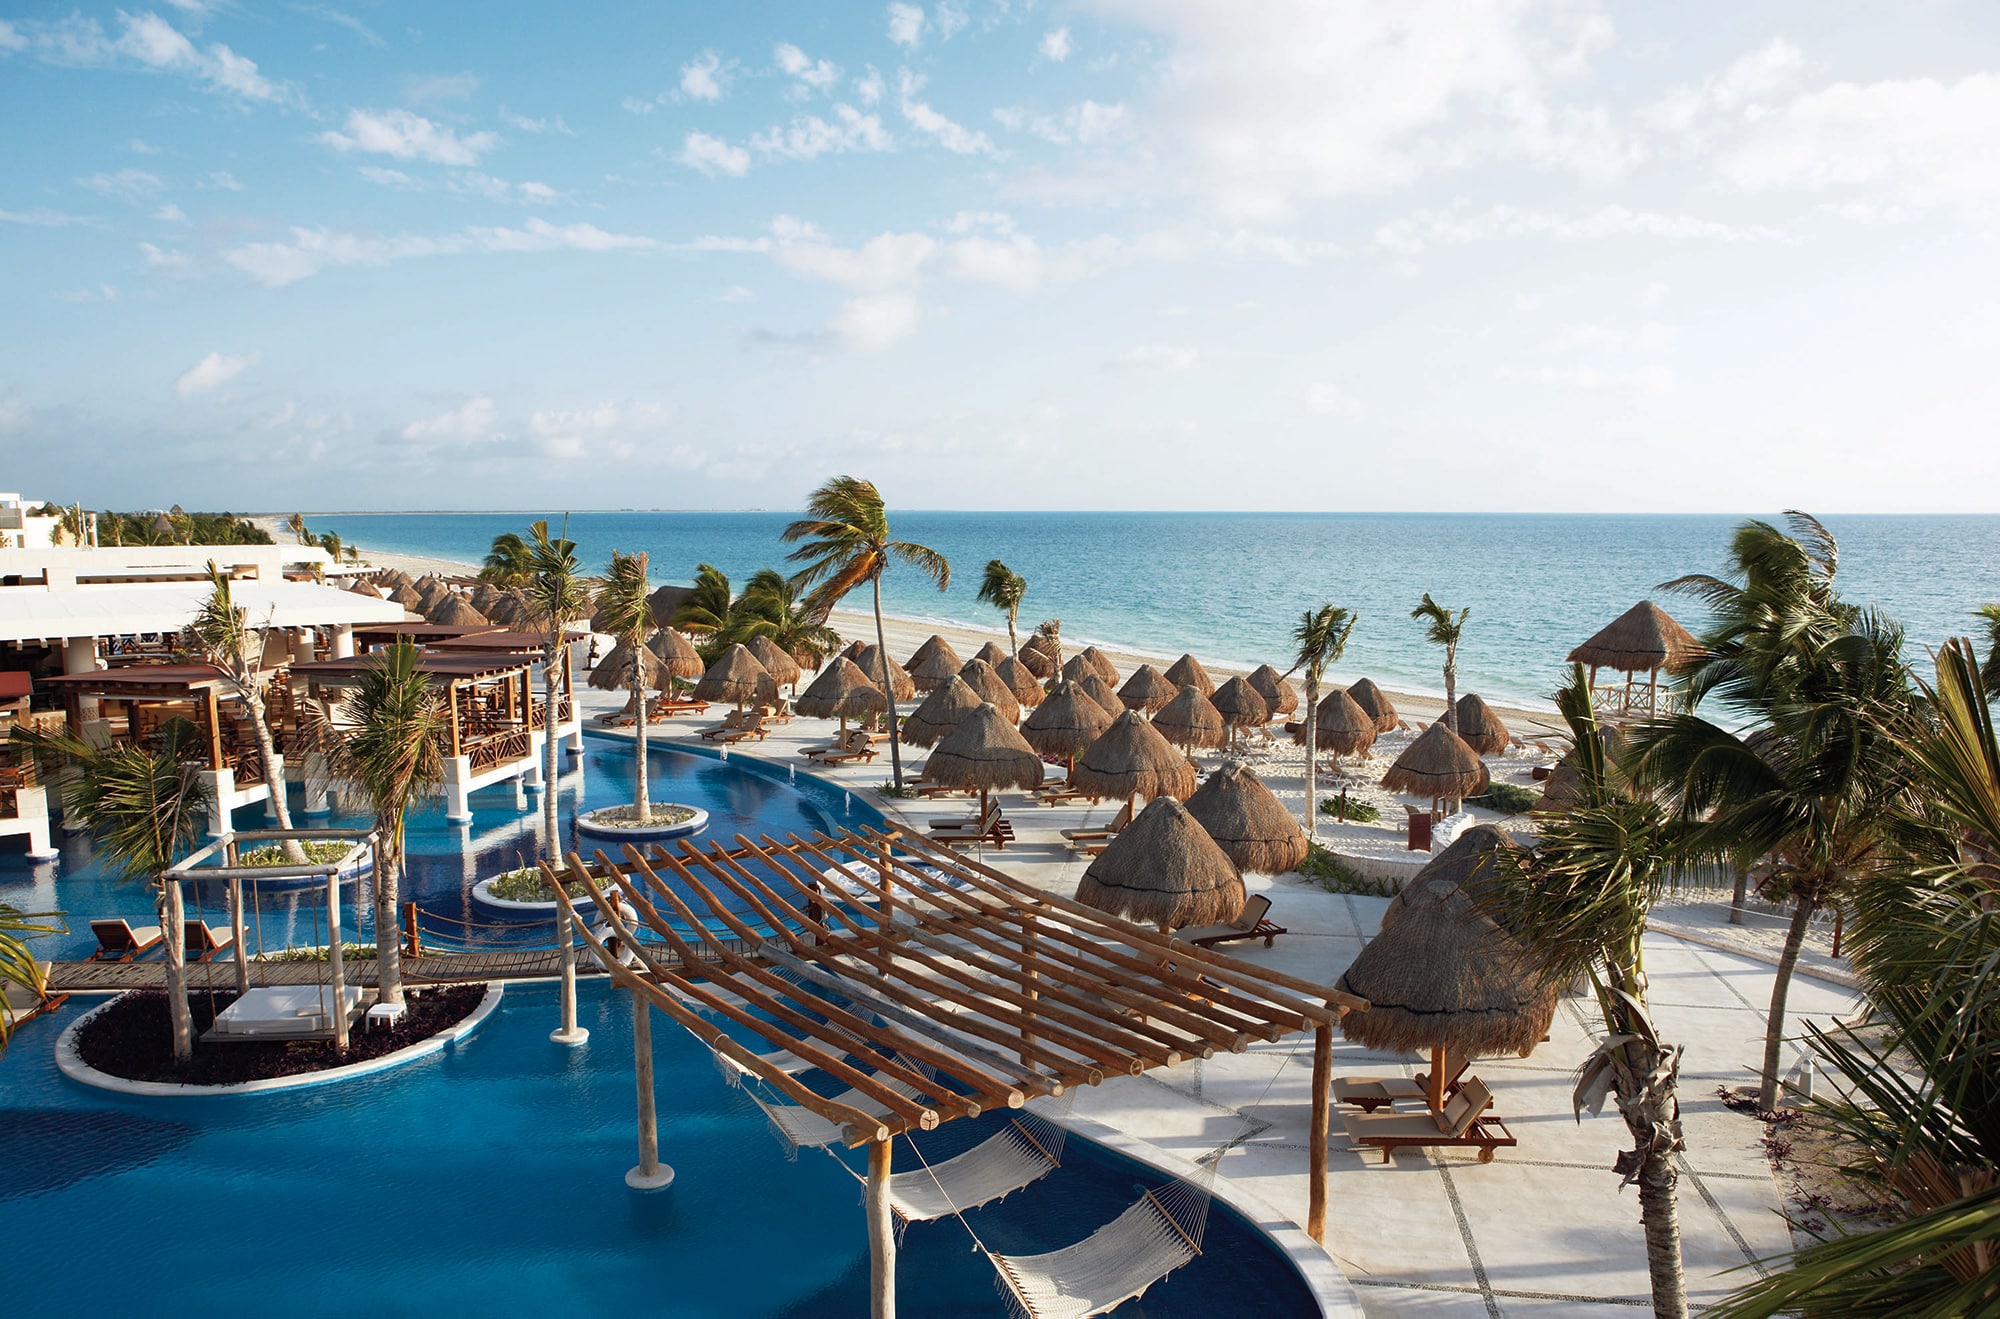 Best Hotels with Pools in the Caribbean: Excellence Playa Mujeres